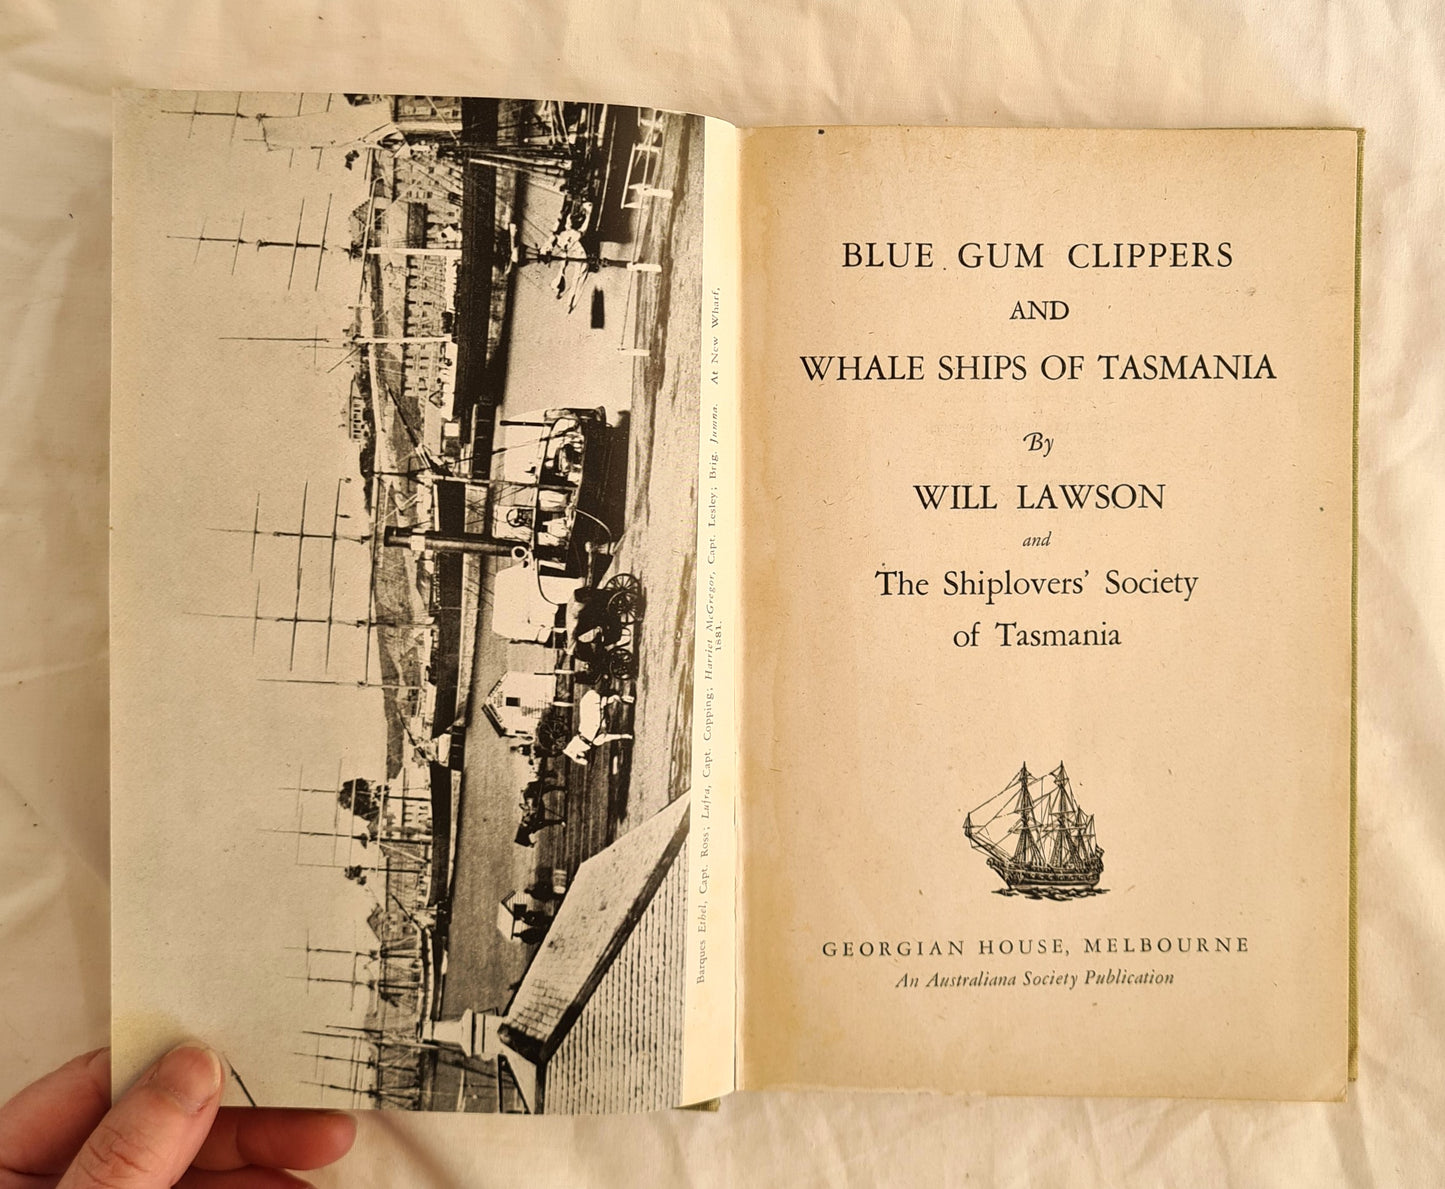 Blue Gum Clippers and Whale Ships of Tasmania  by Will Lawson and The Shiplovers’ Society of Tasmania